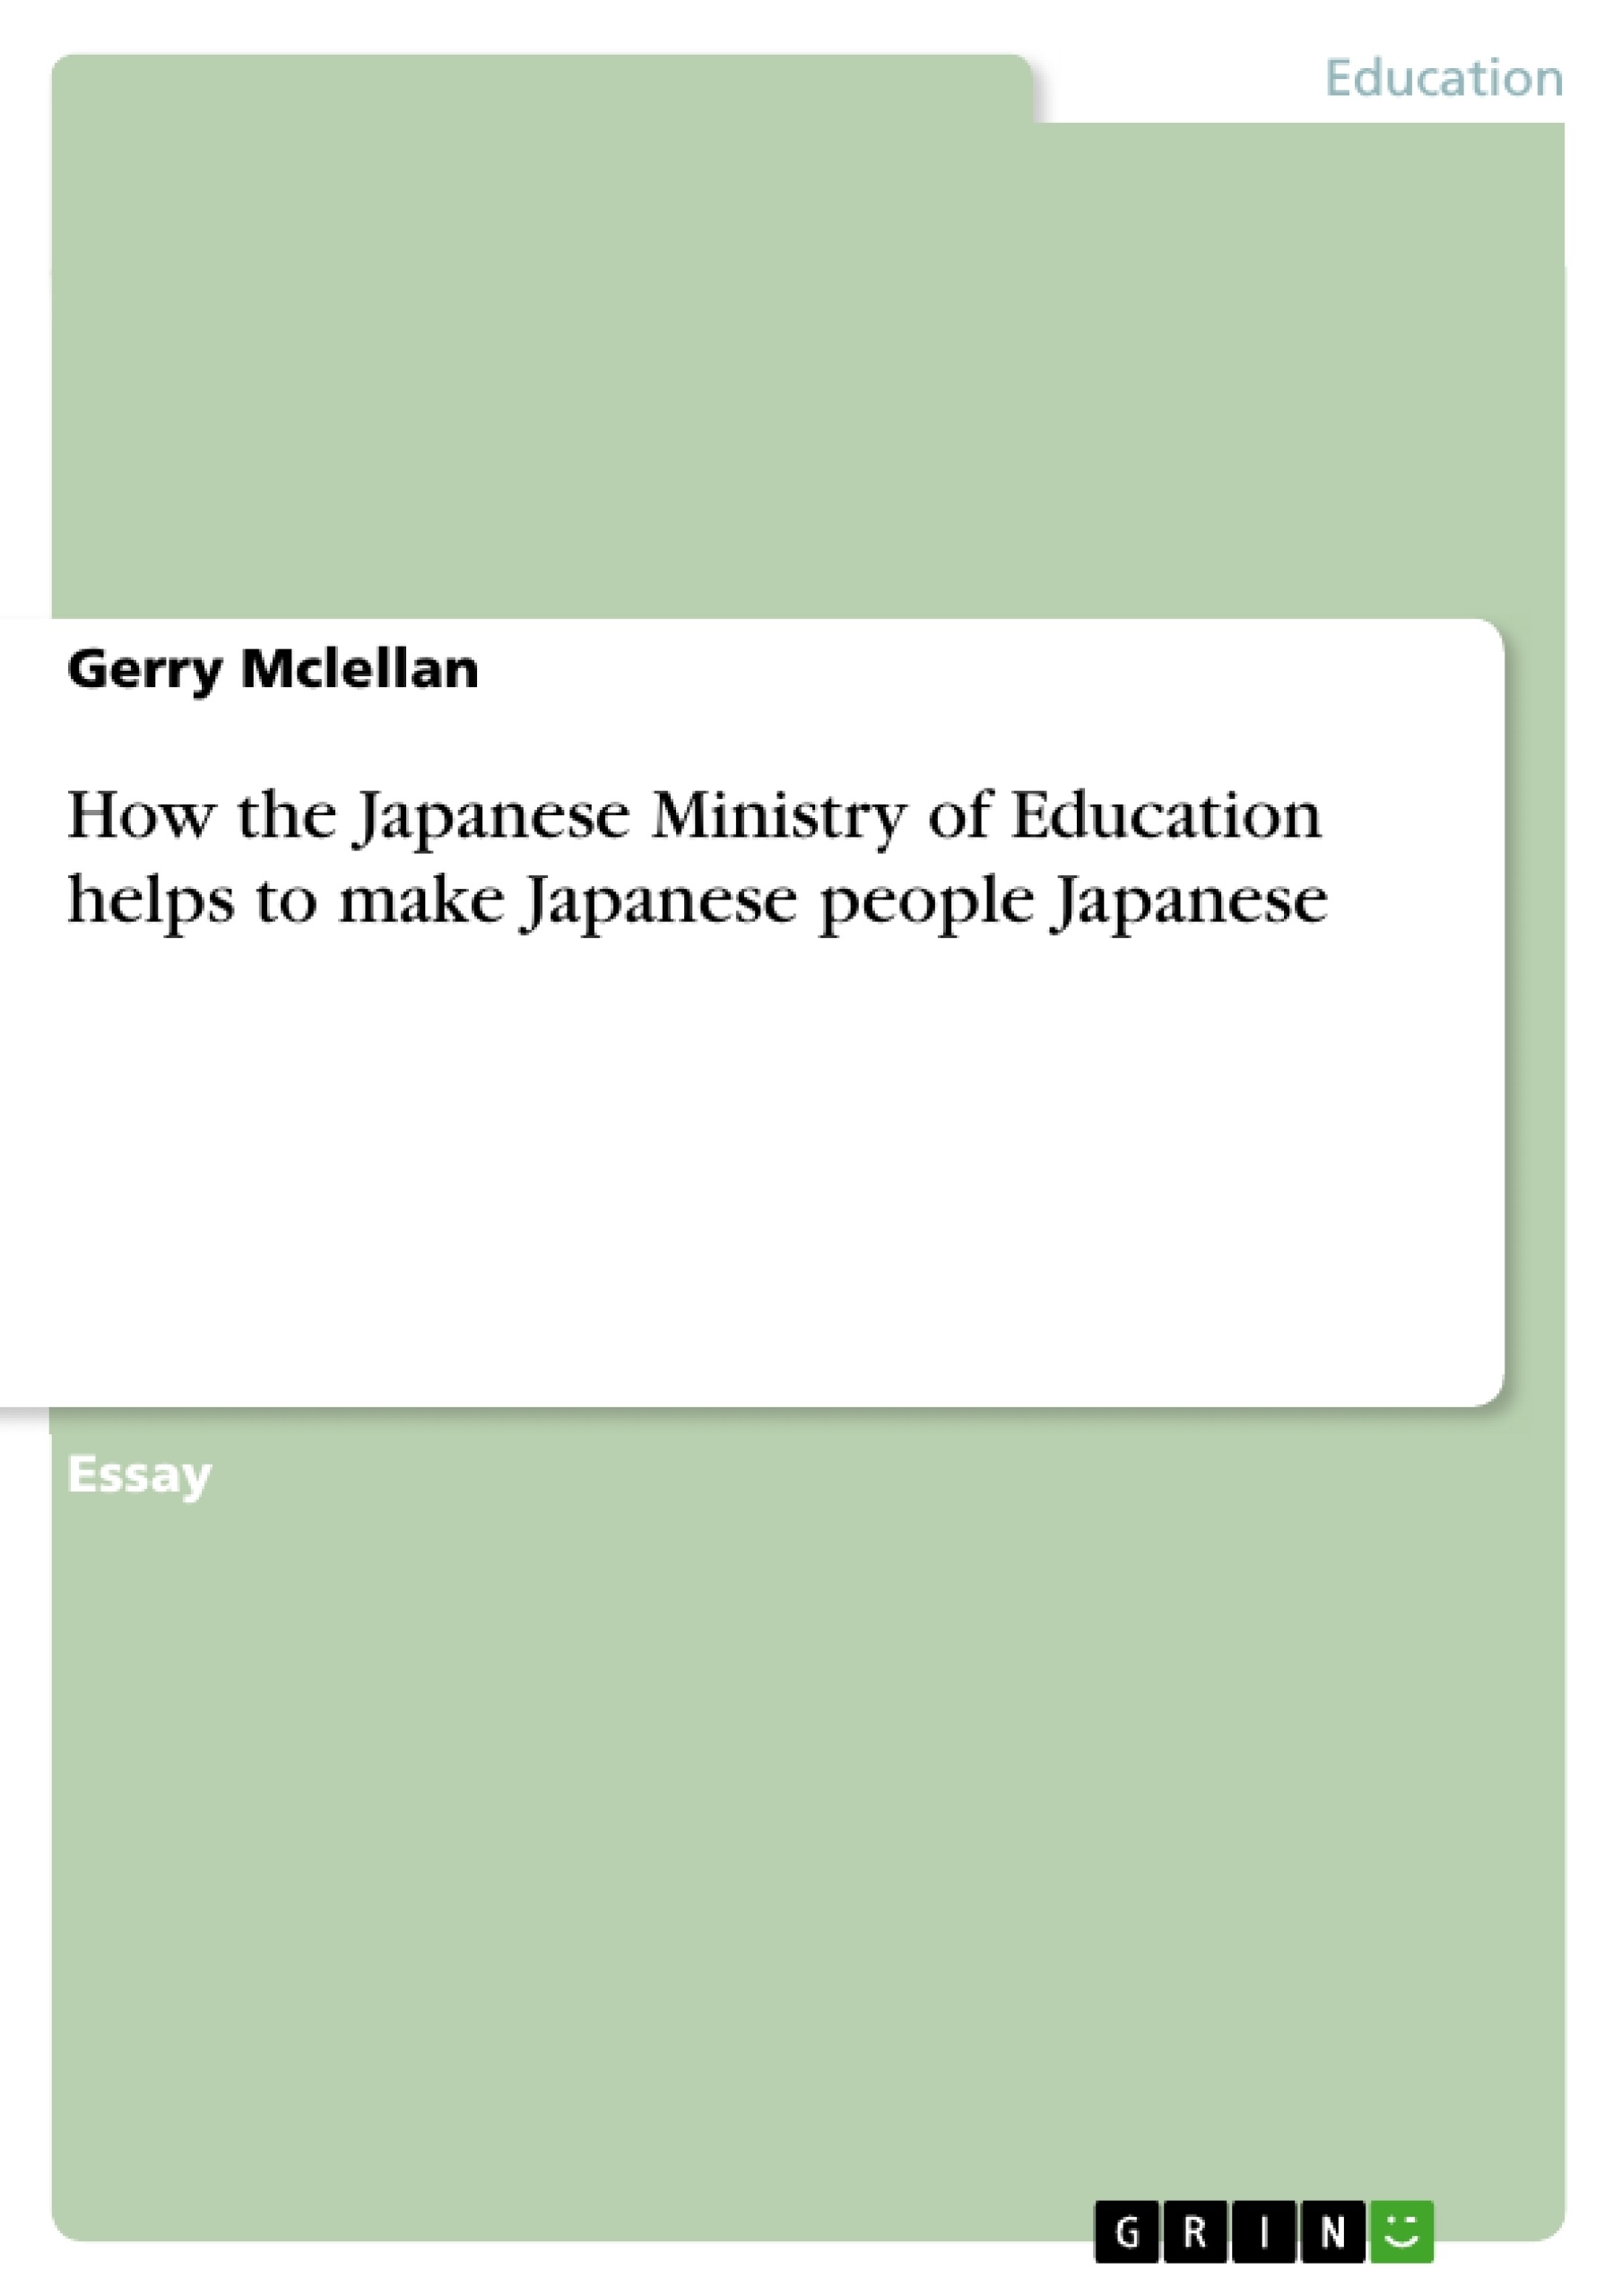 Título: How the Japanese Ministry of Education helps to make Japanese people Japanese